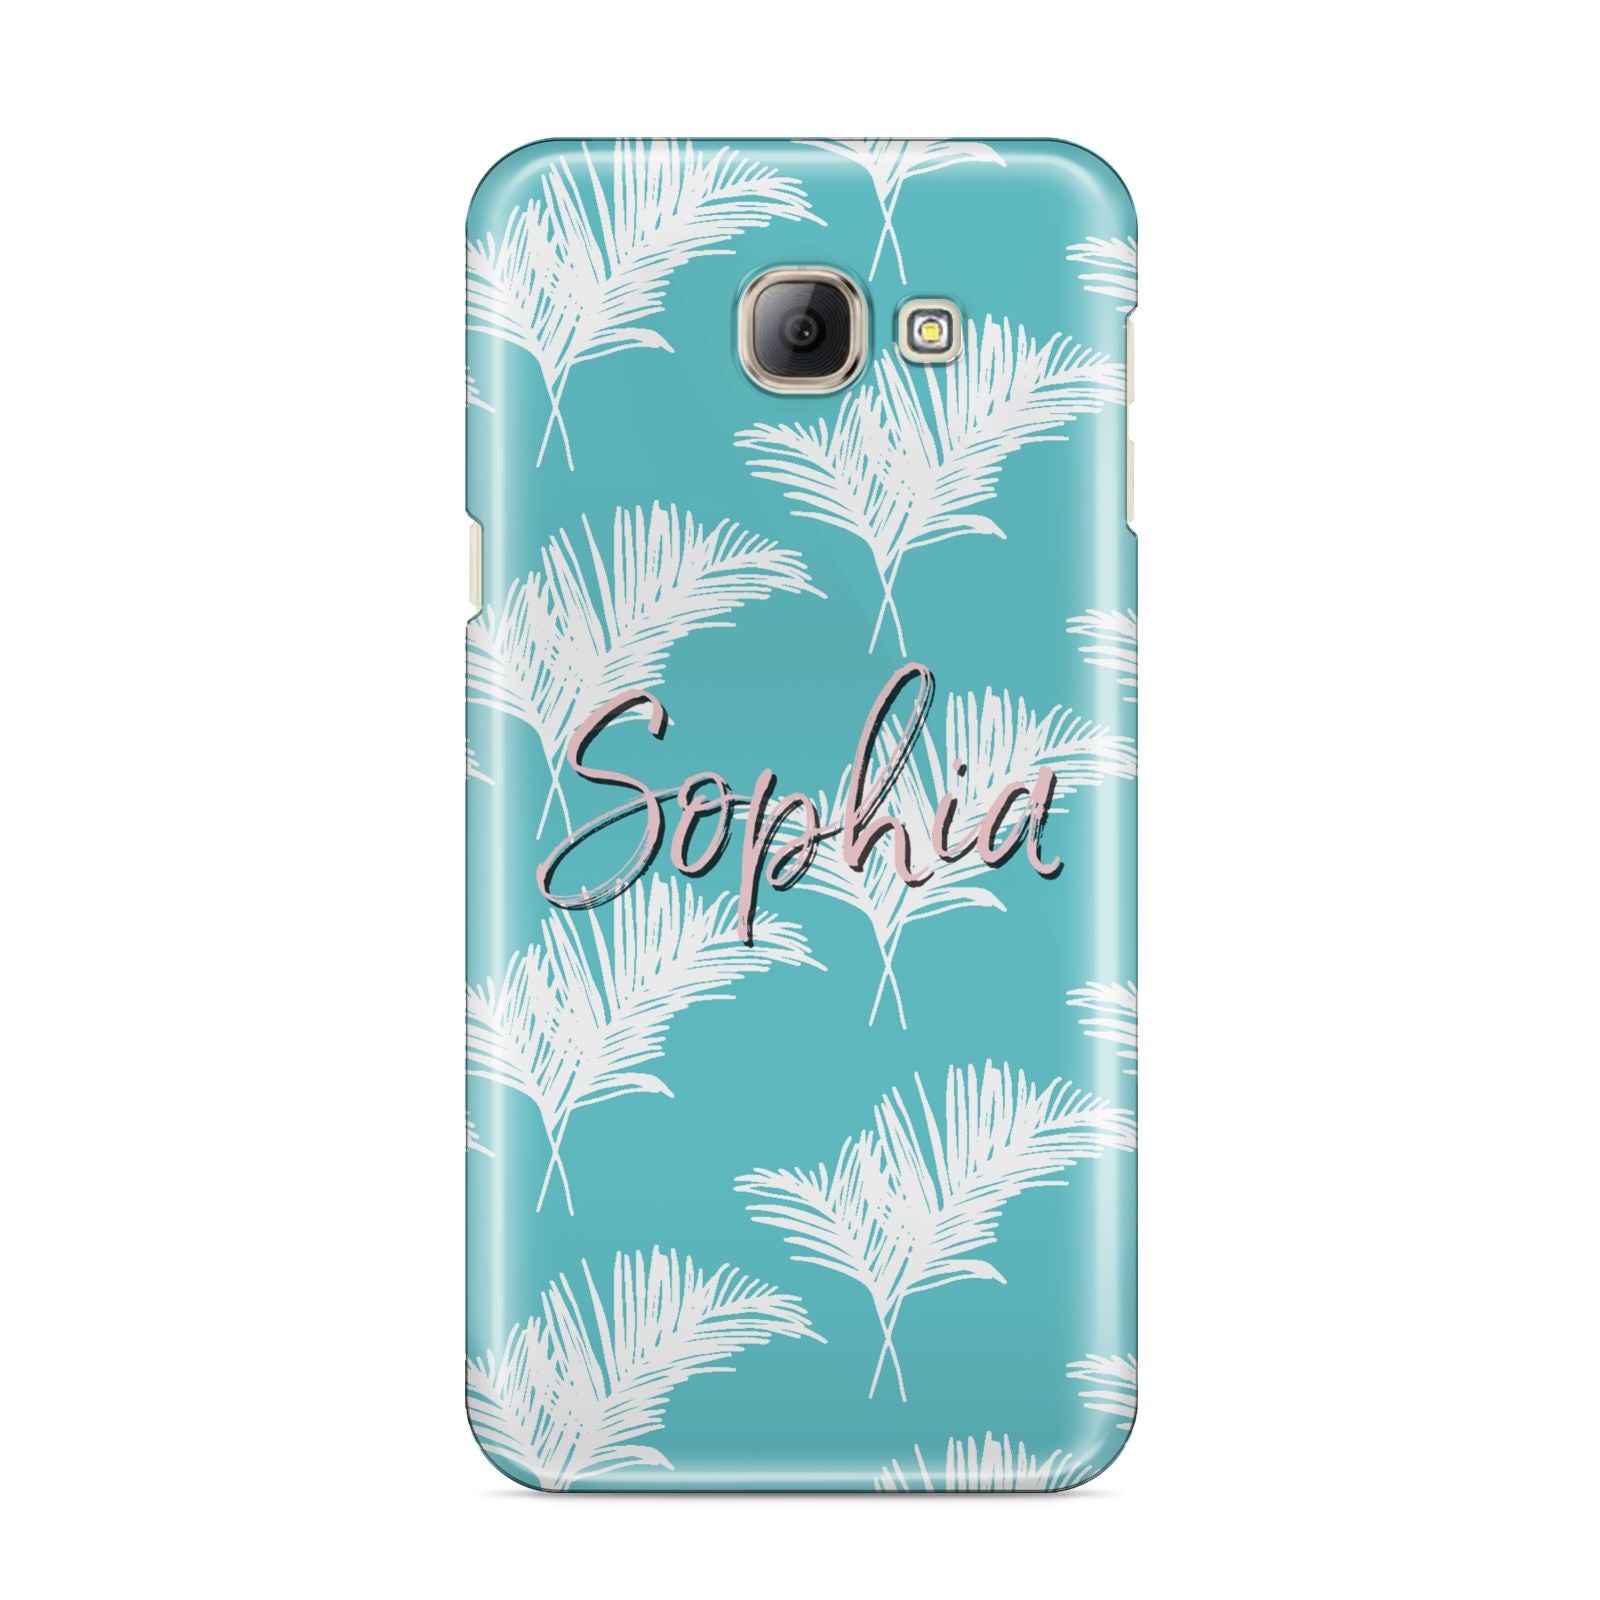 Personalised Blue White Tropical Foliage Samsung Galaxy A8 2016 Case